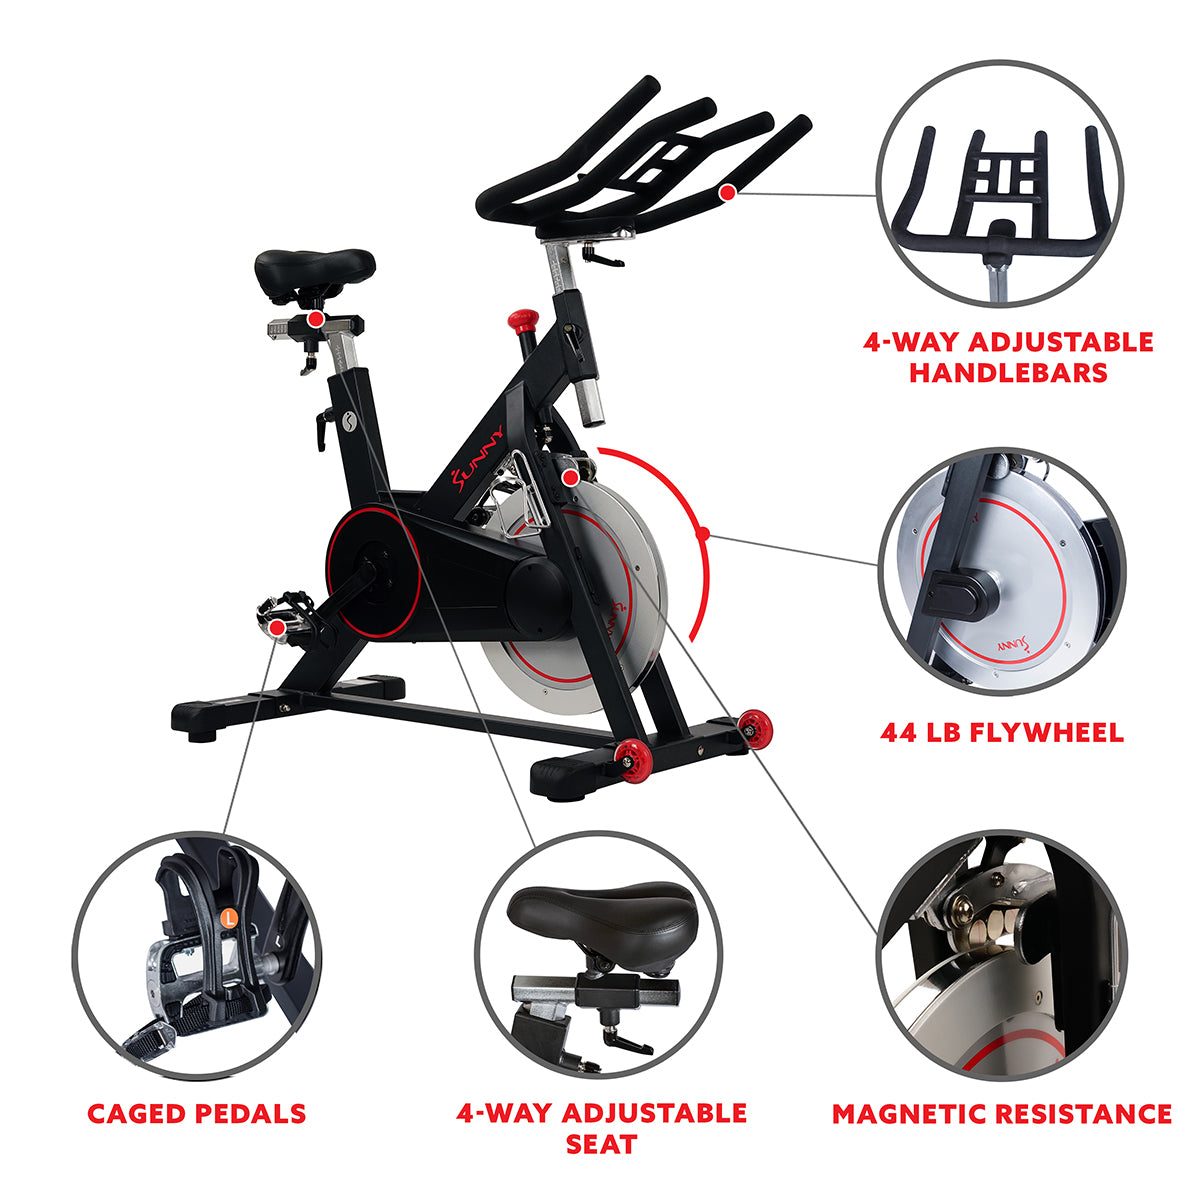 Sunny Health & Fitness Magnetic Indoor Cycling Bike